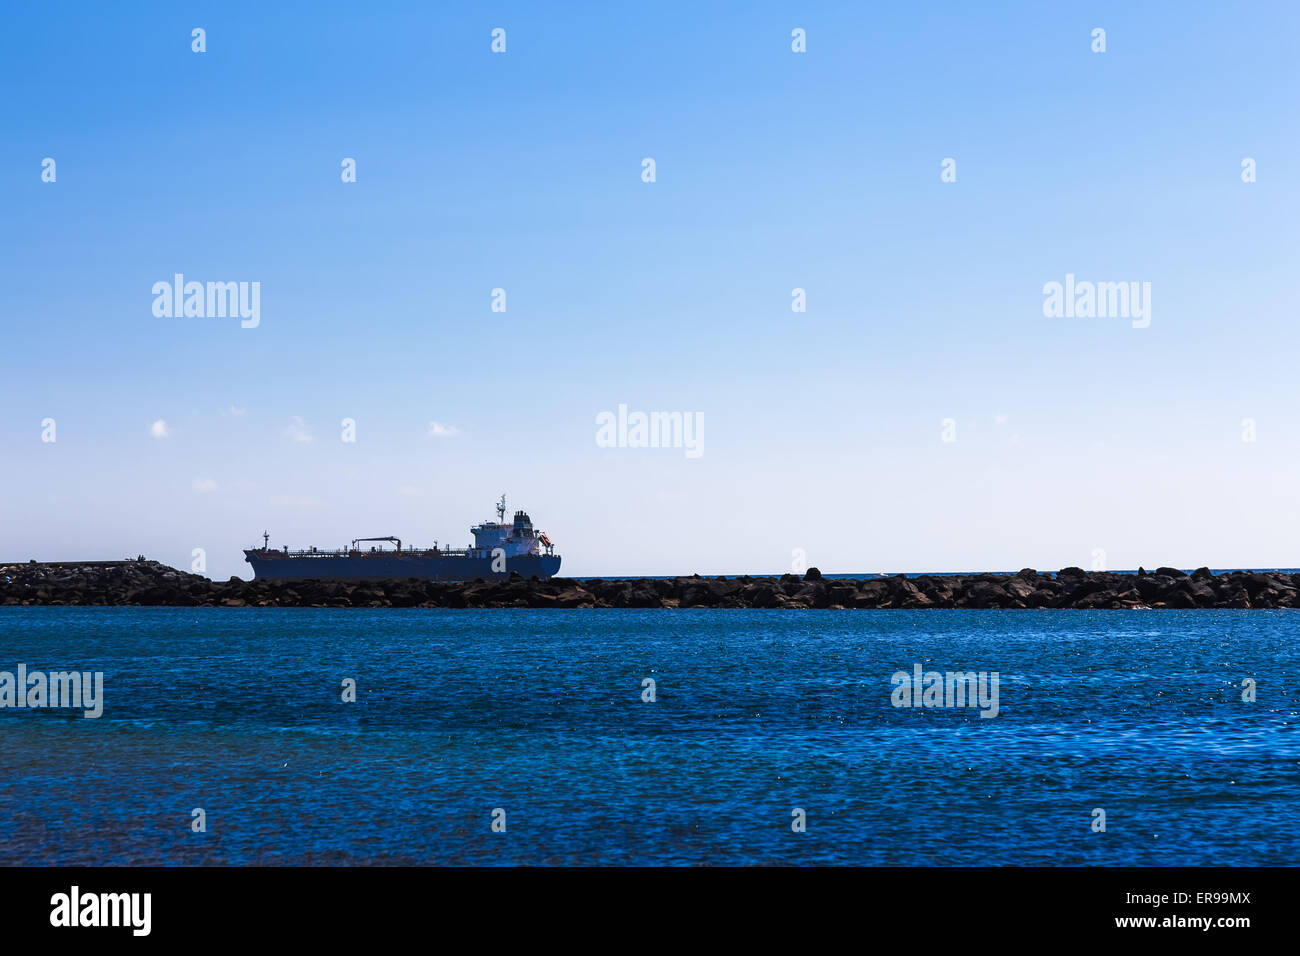 Cargo ship on the water. View from shore through breakwater Stock Photo